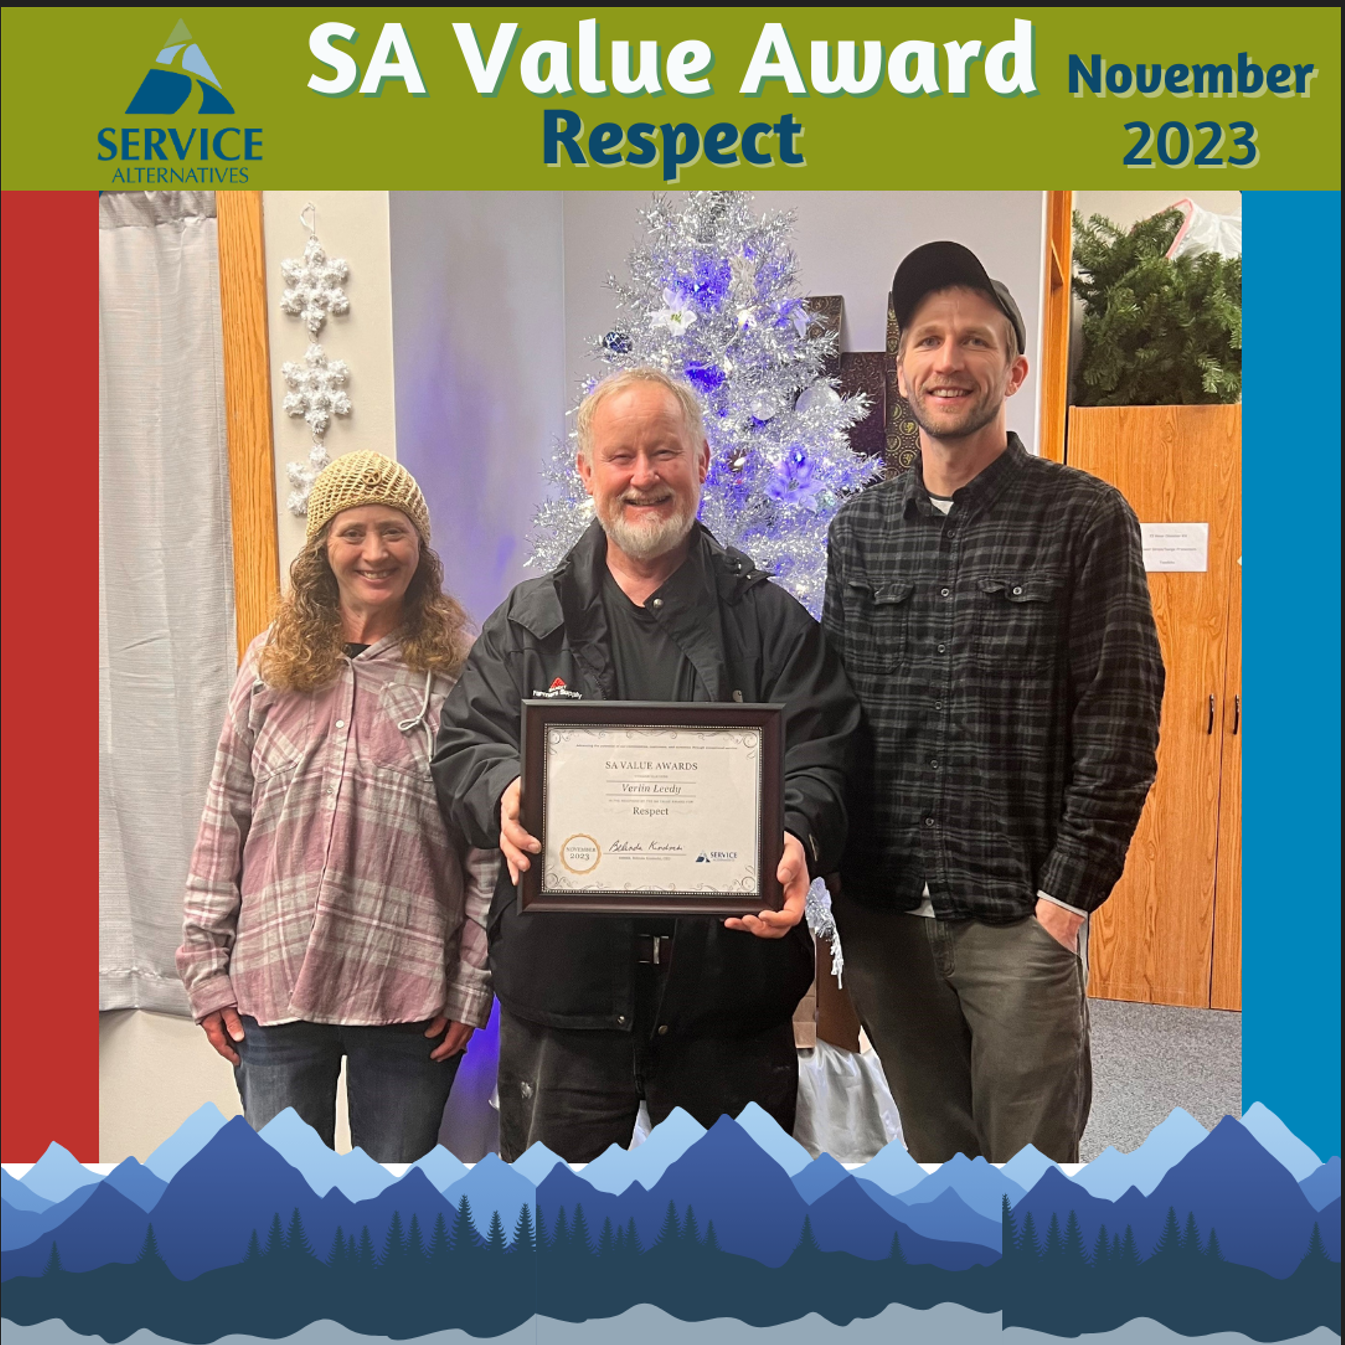 Pictured: Verlin Leedy(middle) receiving the award from Lisa Quilico, Manager (left) and Patrick Layton, Area Manager (right).